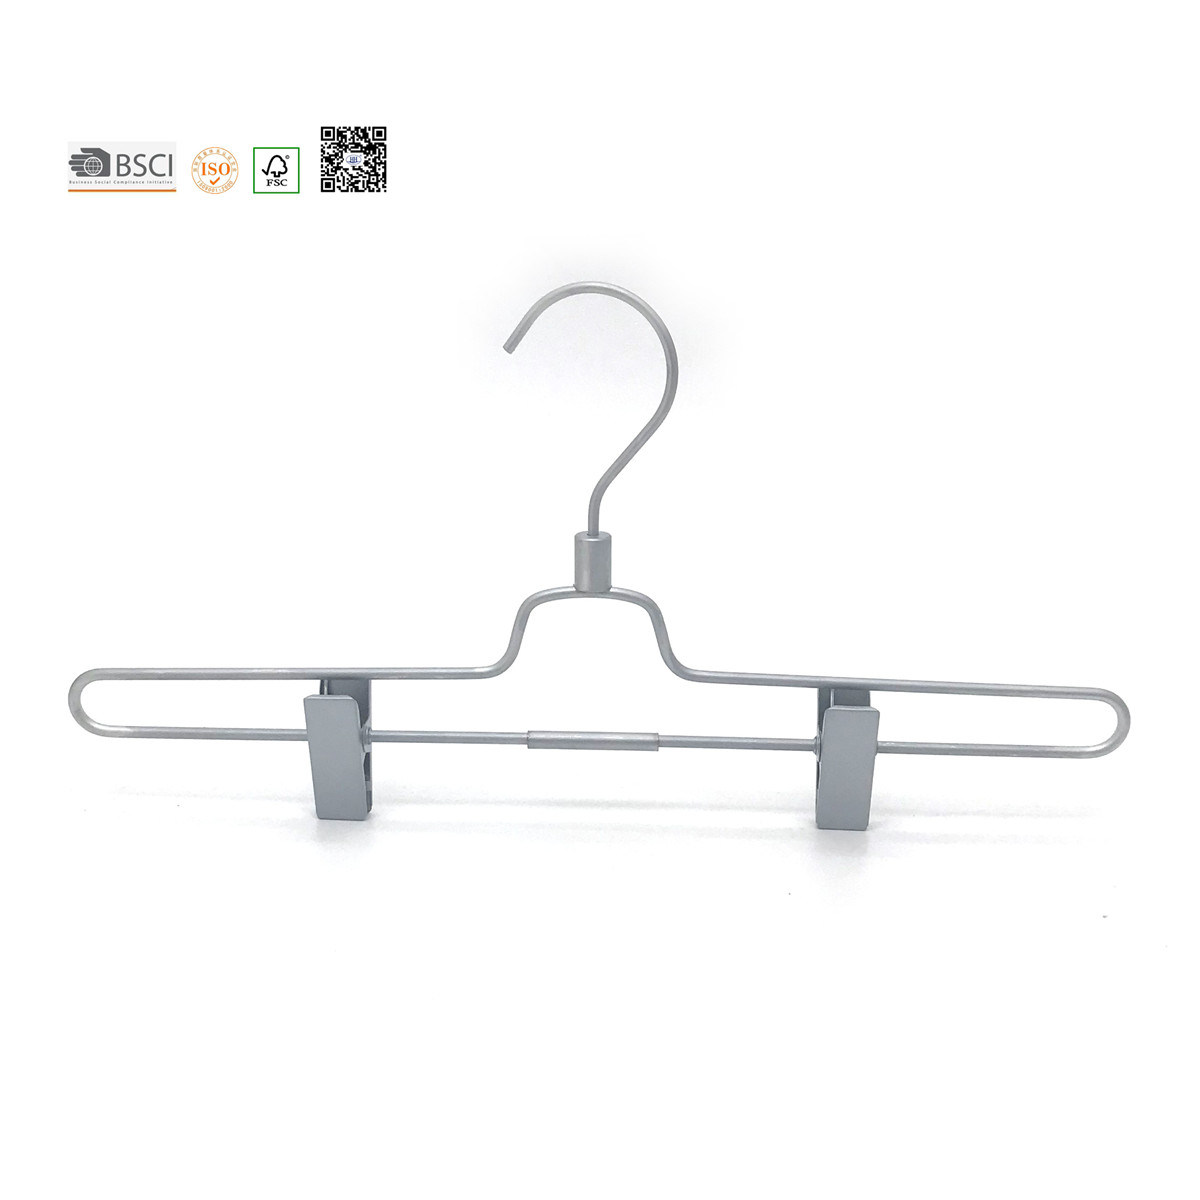 /proimages/2f0j00TEyYCqzGHebd/hh-metal-wire-clothes-hanger-chrome-clips-hanger.jpg